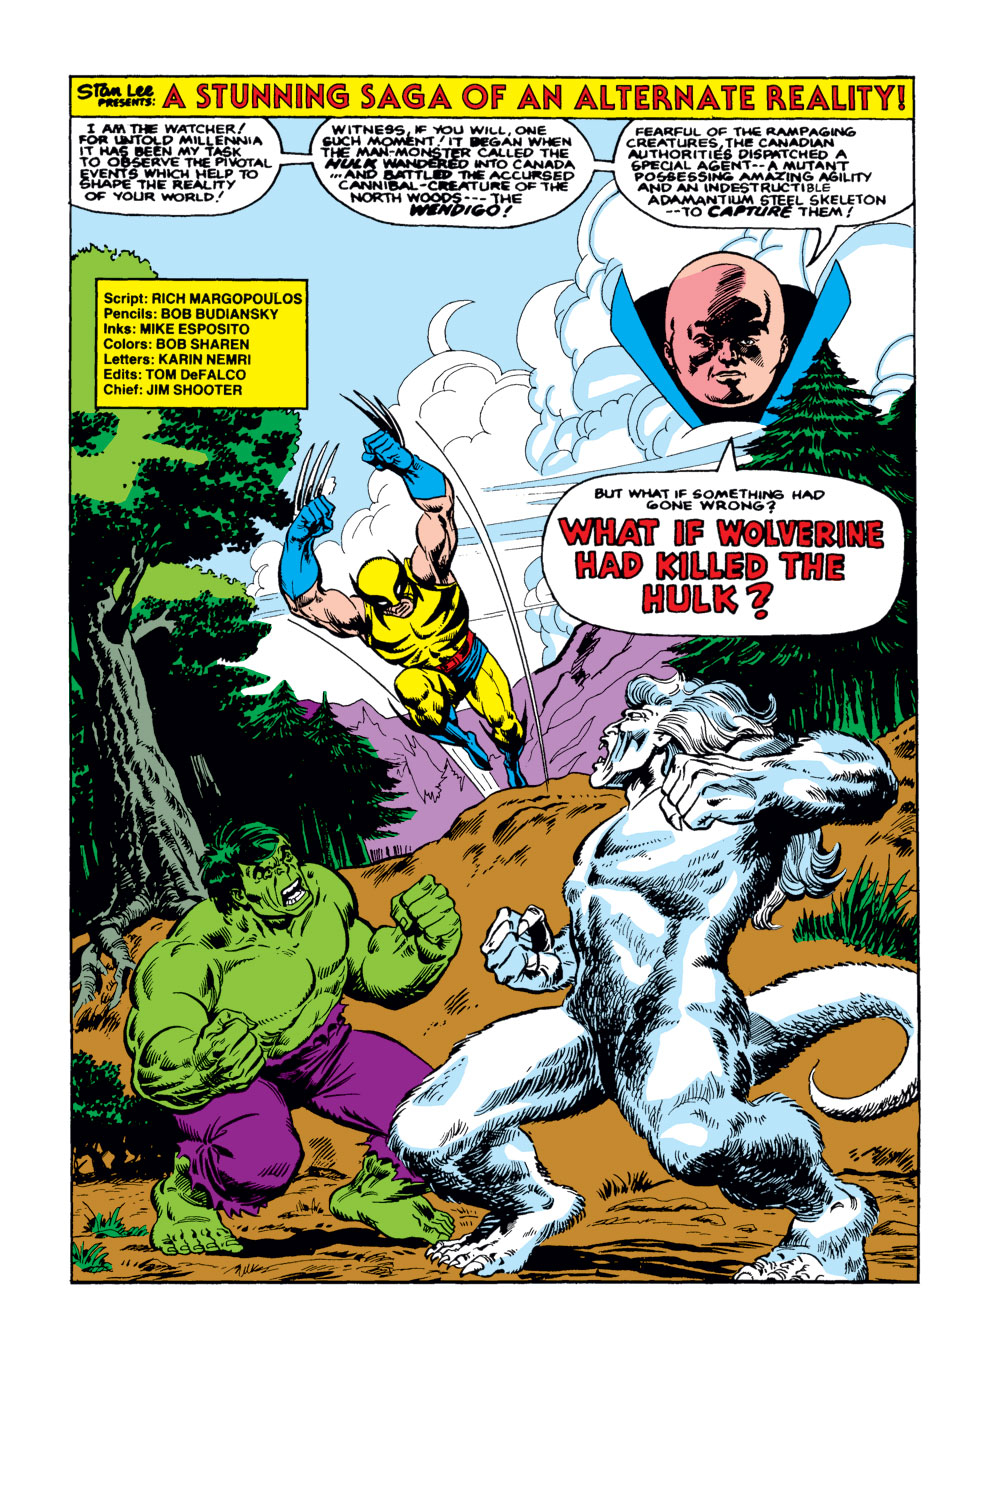 What If? (1977) issue 31 - Wolverine had killed the Hulk - Page 2